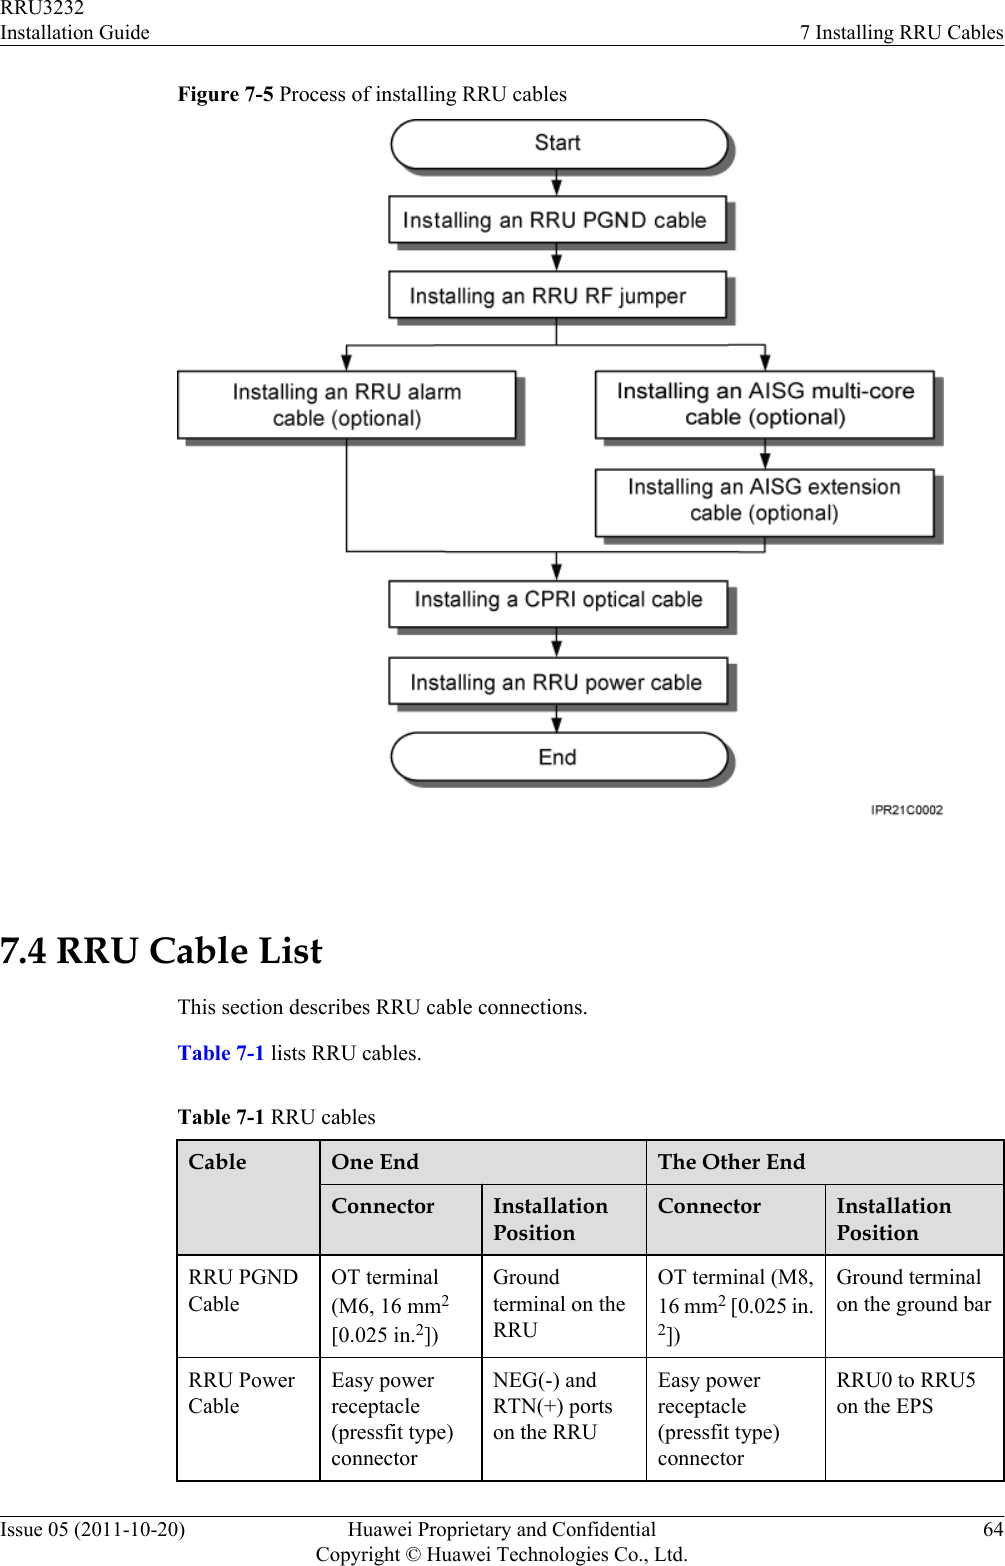 Figure 7-5 Process of installing RRU cables 7.4 RRU Cable ListThis section describes RRU cable connections.Table 7-1 lists RRU cables.Table 7-1 RRU cablesCable One End The Other EndConnector InstallationPositionConnector InstallationPositionRRU PGNDCableOT terminal(M6, 16 mm2[0.025 in.2])Groundterminal on theRRUOT terminal (M8,16 mm2 [0.025 in.2])Ground terminalon the ground barRRU PowerCableEasy powerreceptacle(pressfit type)connectorNEG(-) andRTN(+) portson the RRUEasy powerreceptacle(pressfit type)connectorRRU0 to RRU5on the EPSRRU3232Installation Guide 7 Installing RRU CablesIssue 05 (2011-10-20) Huawei Proprietary and ConfidentialCopyright © Huawei Technologies Co., Ltd.64